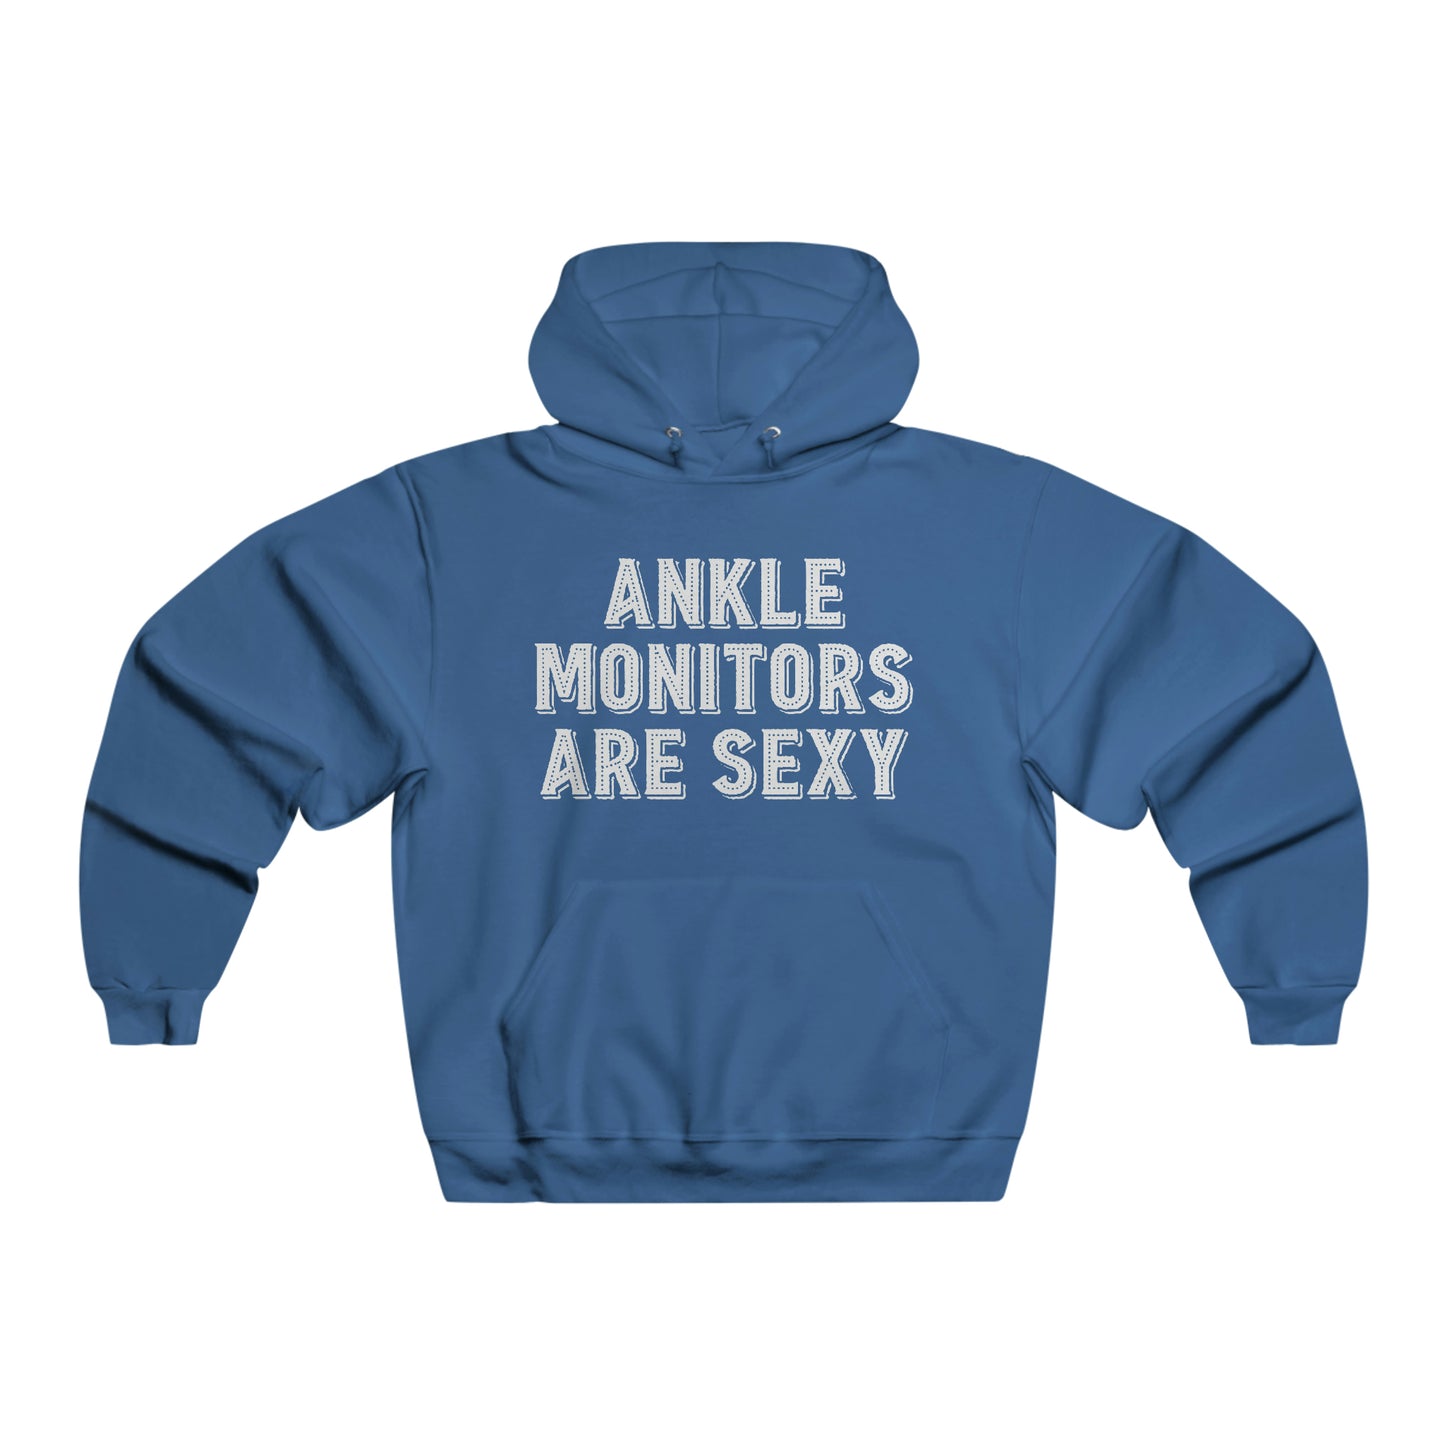 Ankle Monitors Are Sexy - Hooded Sweatshirt